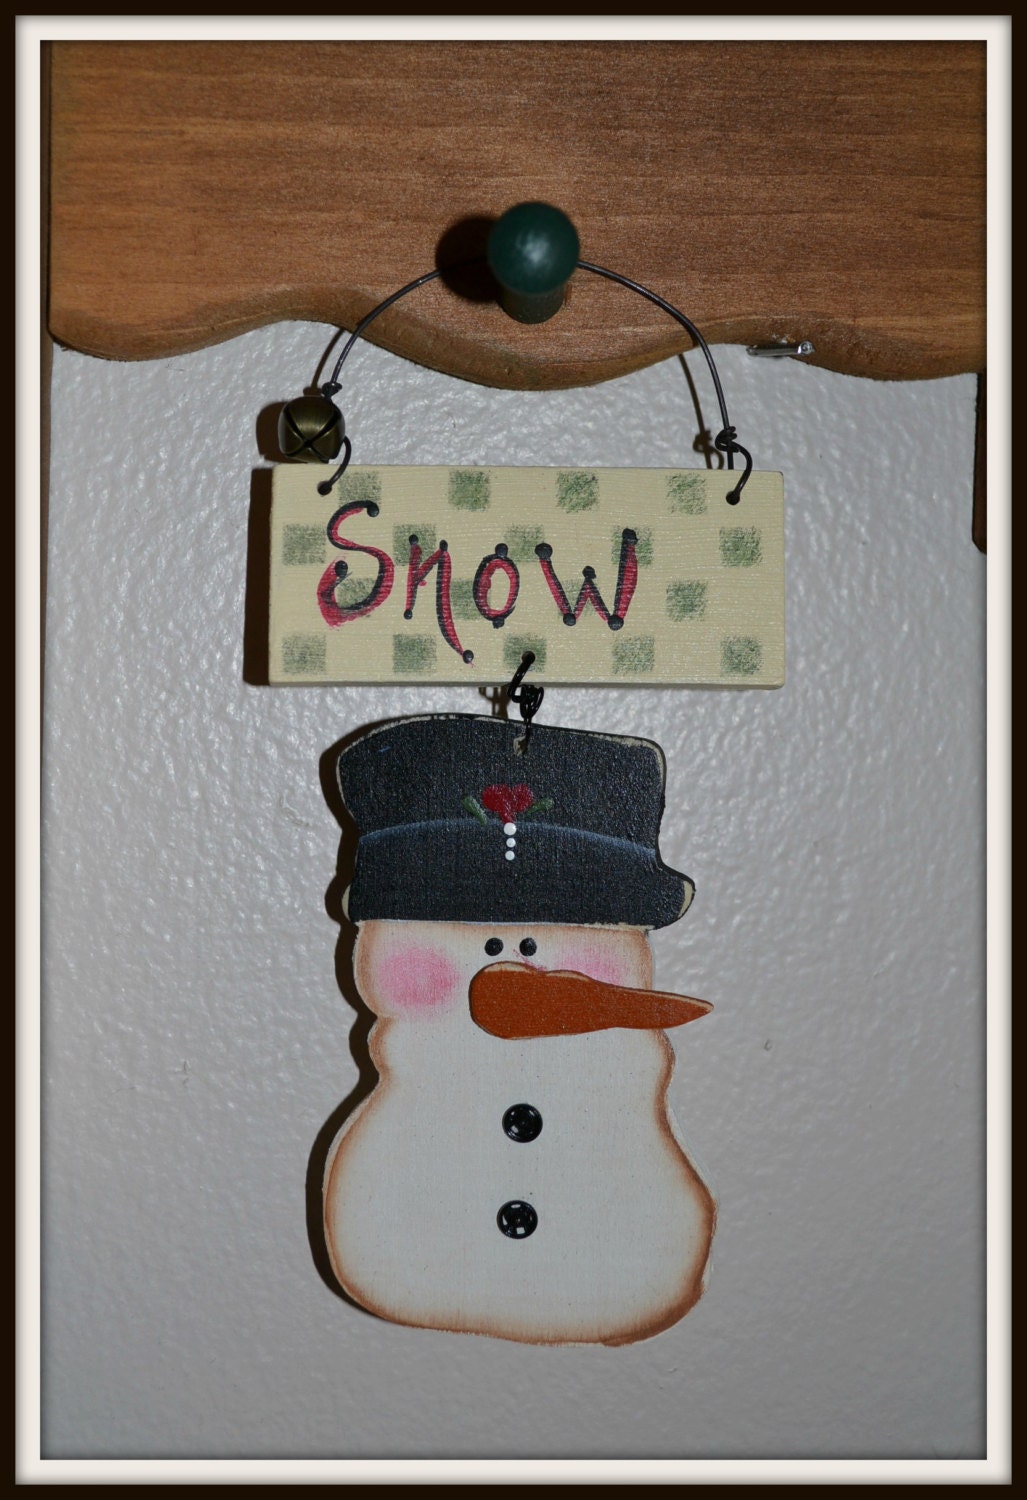 Snowman, snowman handmade ornament, gift tag, made in USA, primitive decor,christmas decoration,free shipping